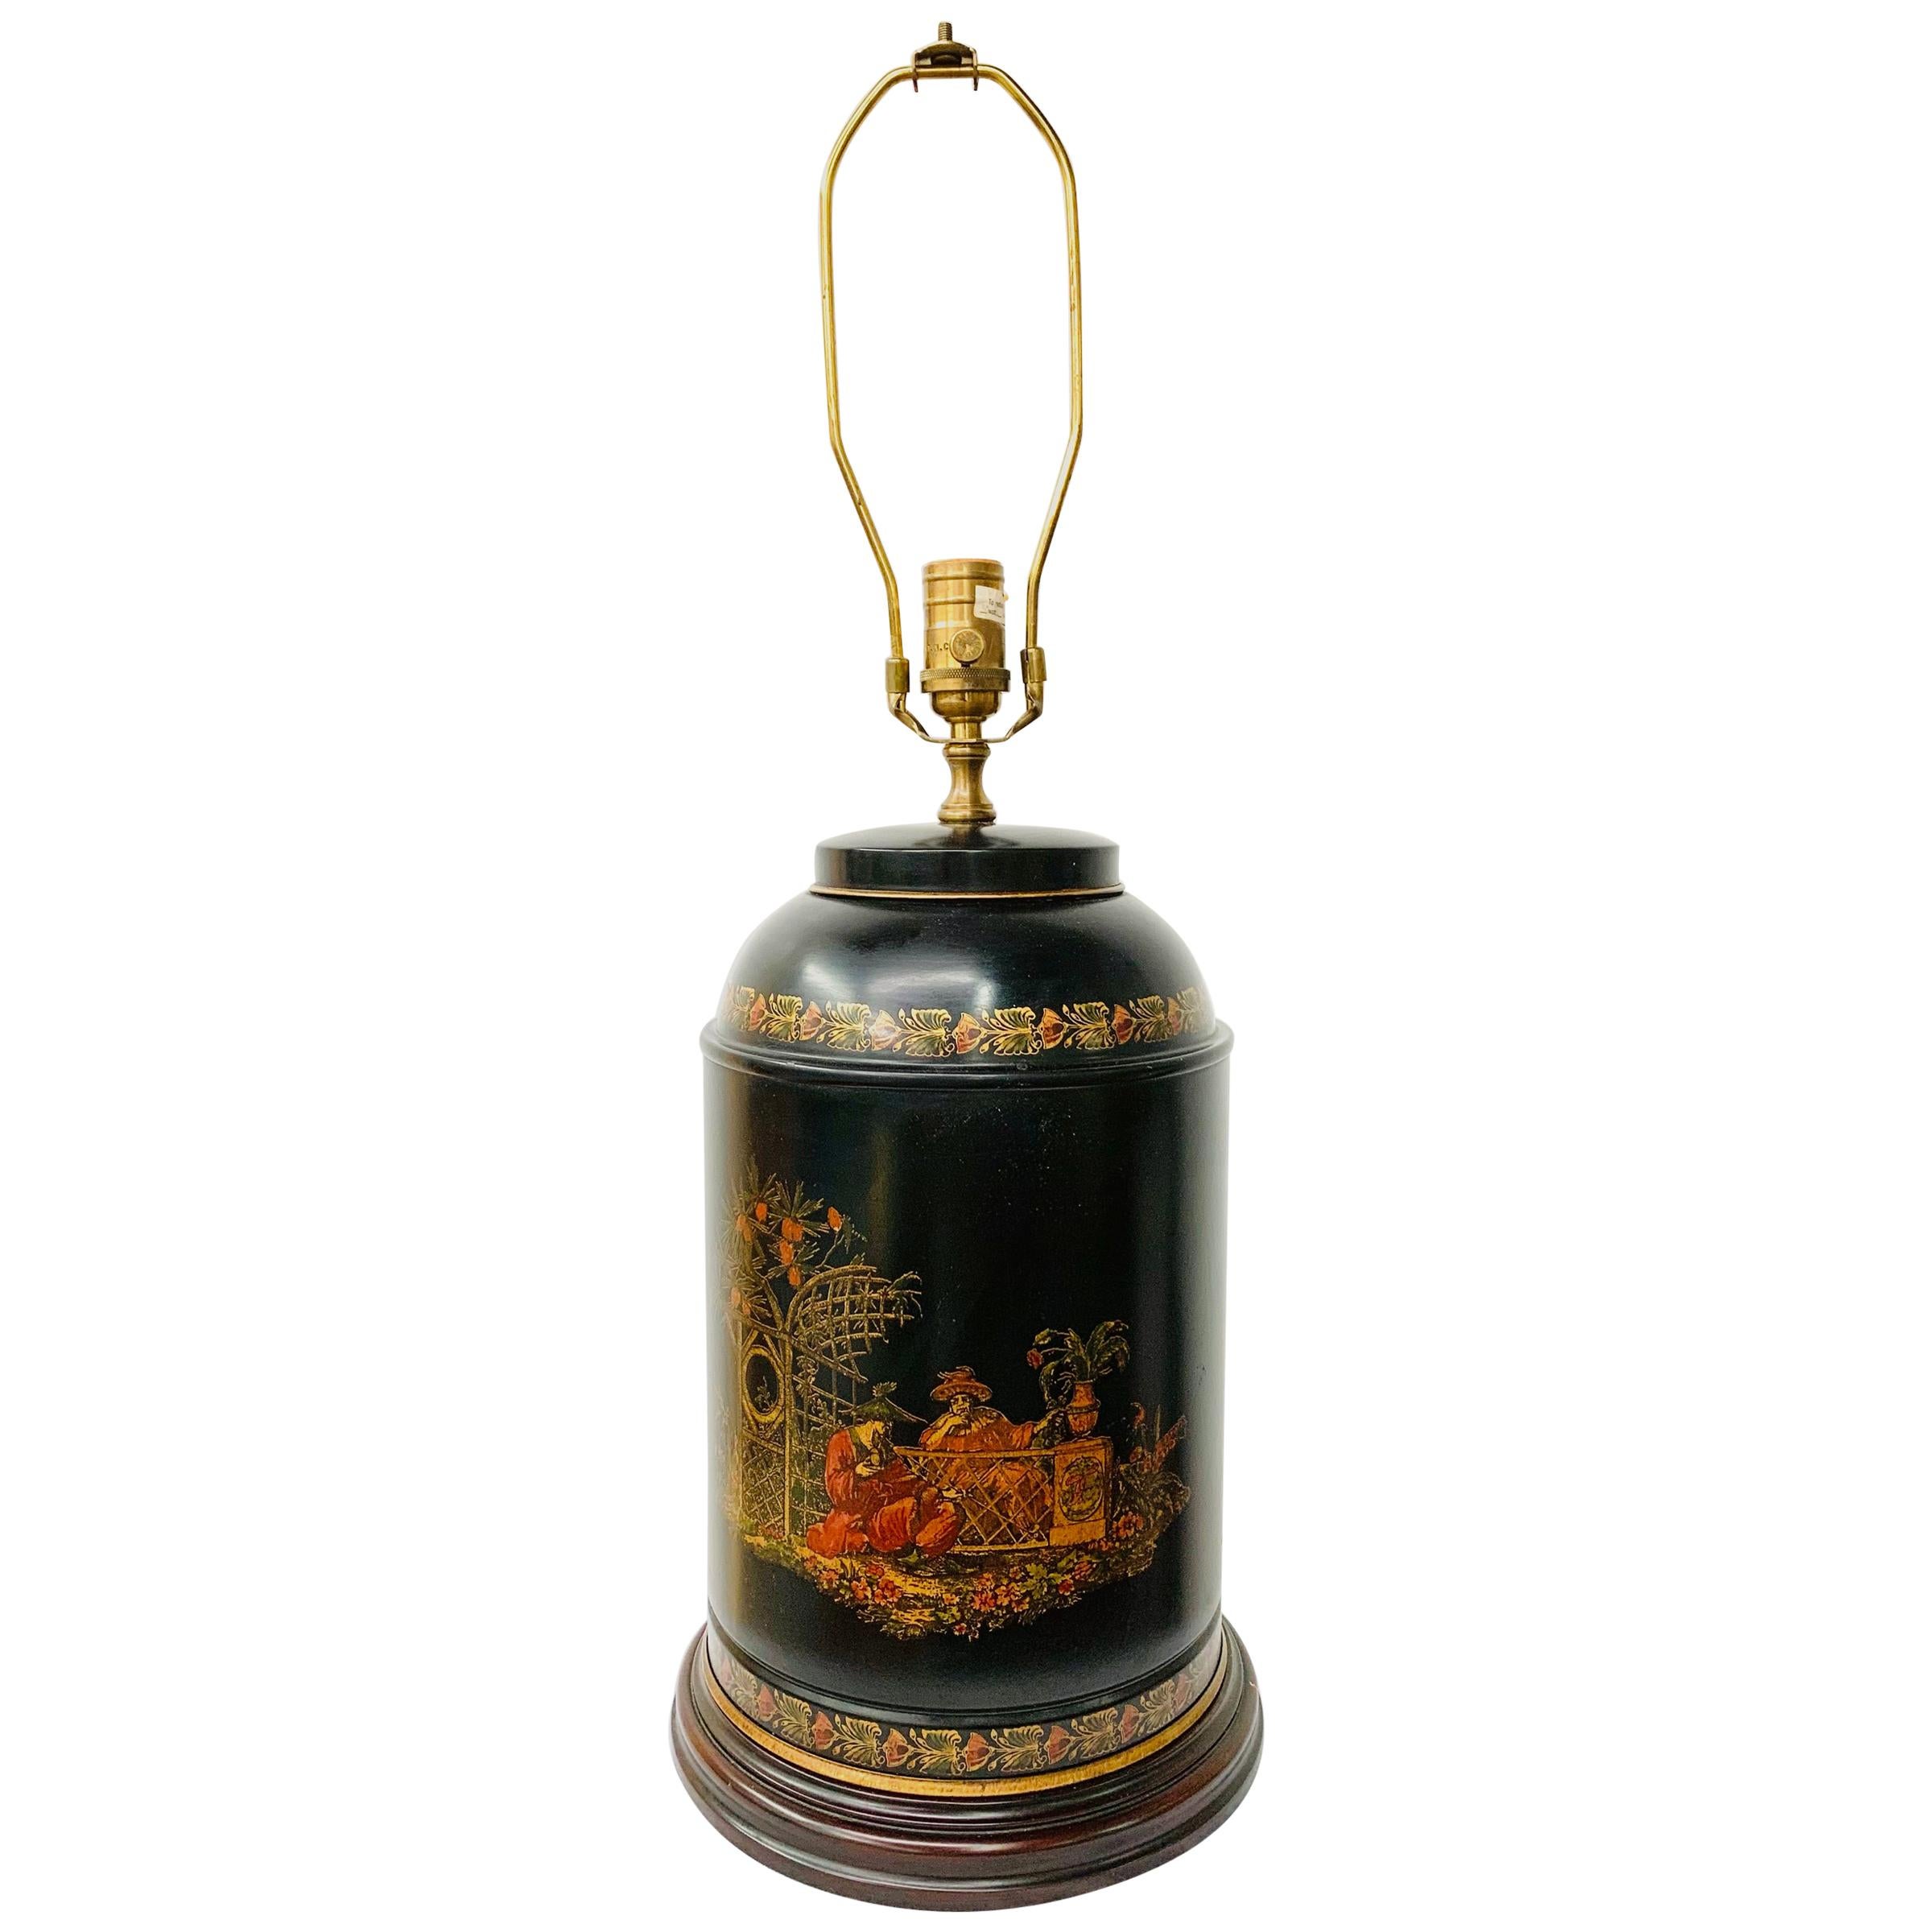 Chinese Black Tea-Caddy Table Lamp